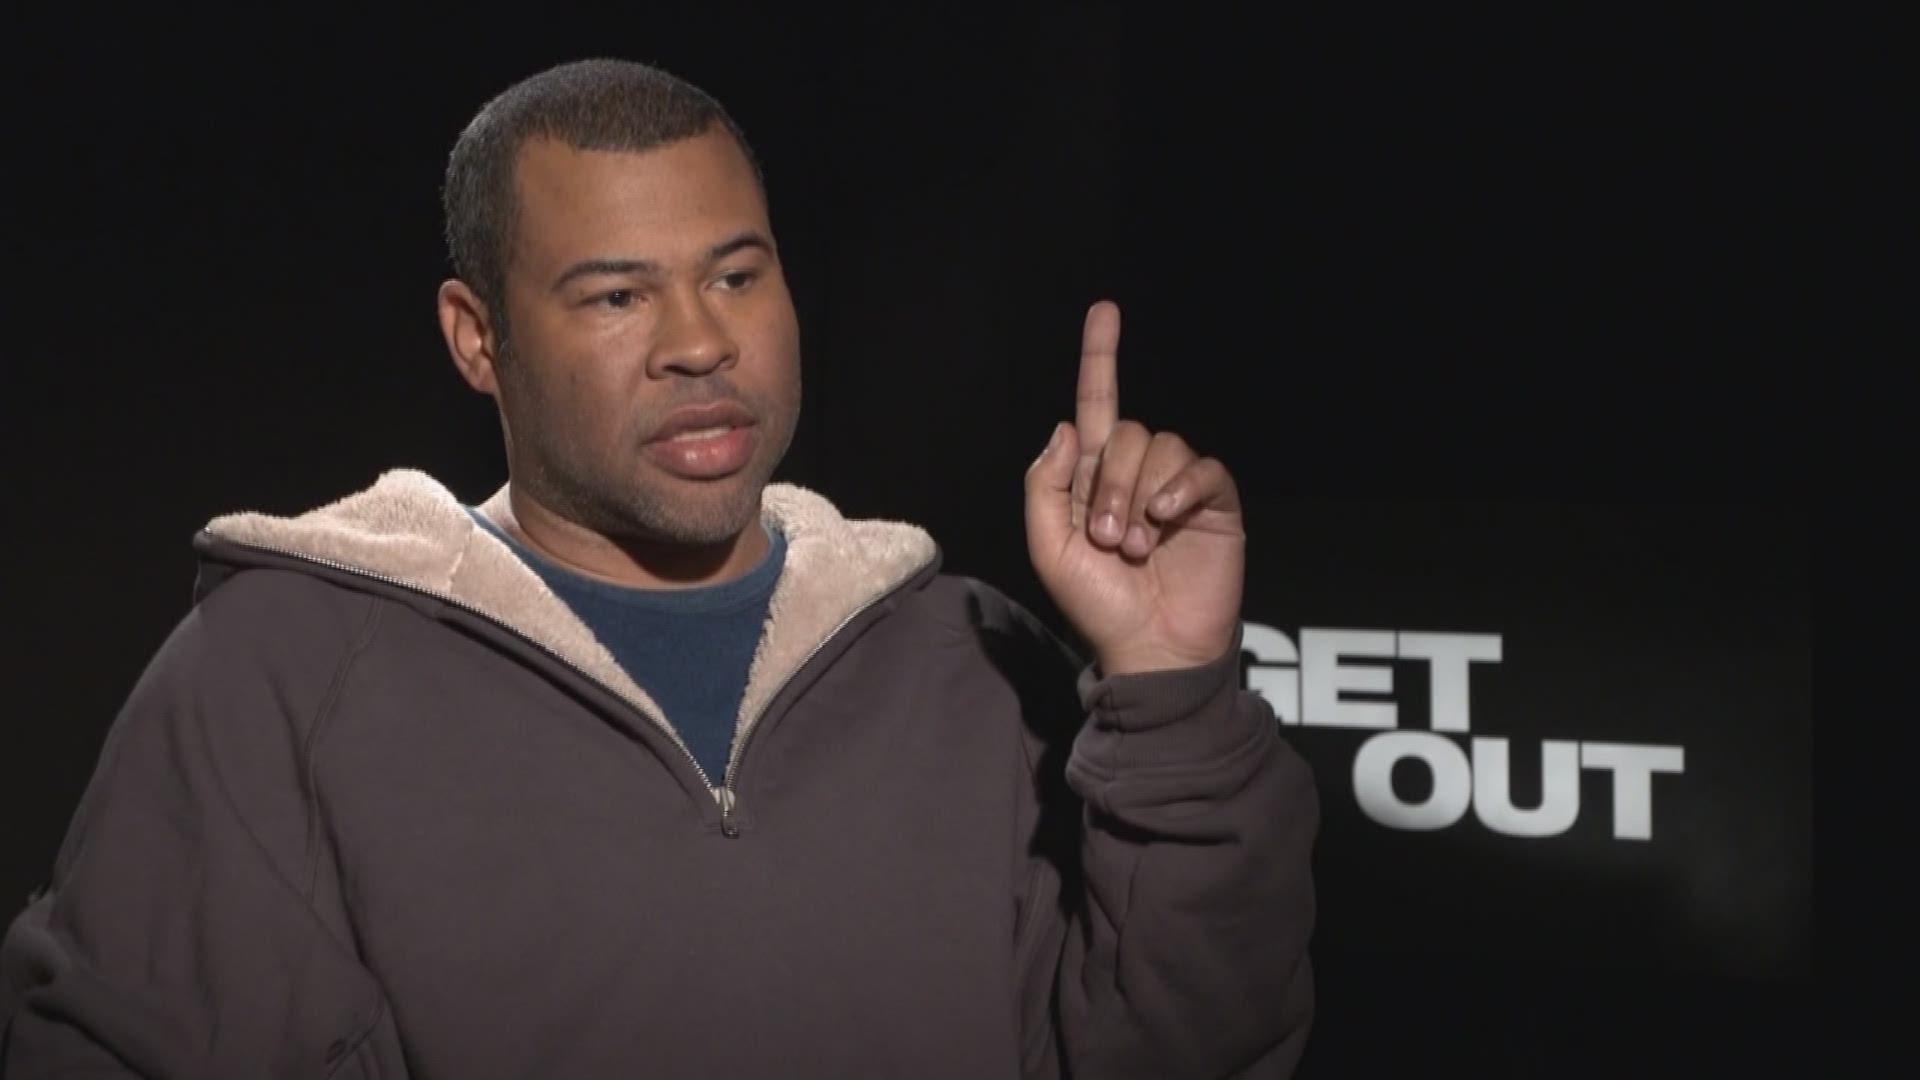 Mark S. Allen sits down with Jordan Peele about his directorial debut, Get Out. (Travel and accommodation costs paid by Universal Pictures)